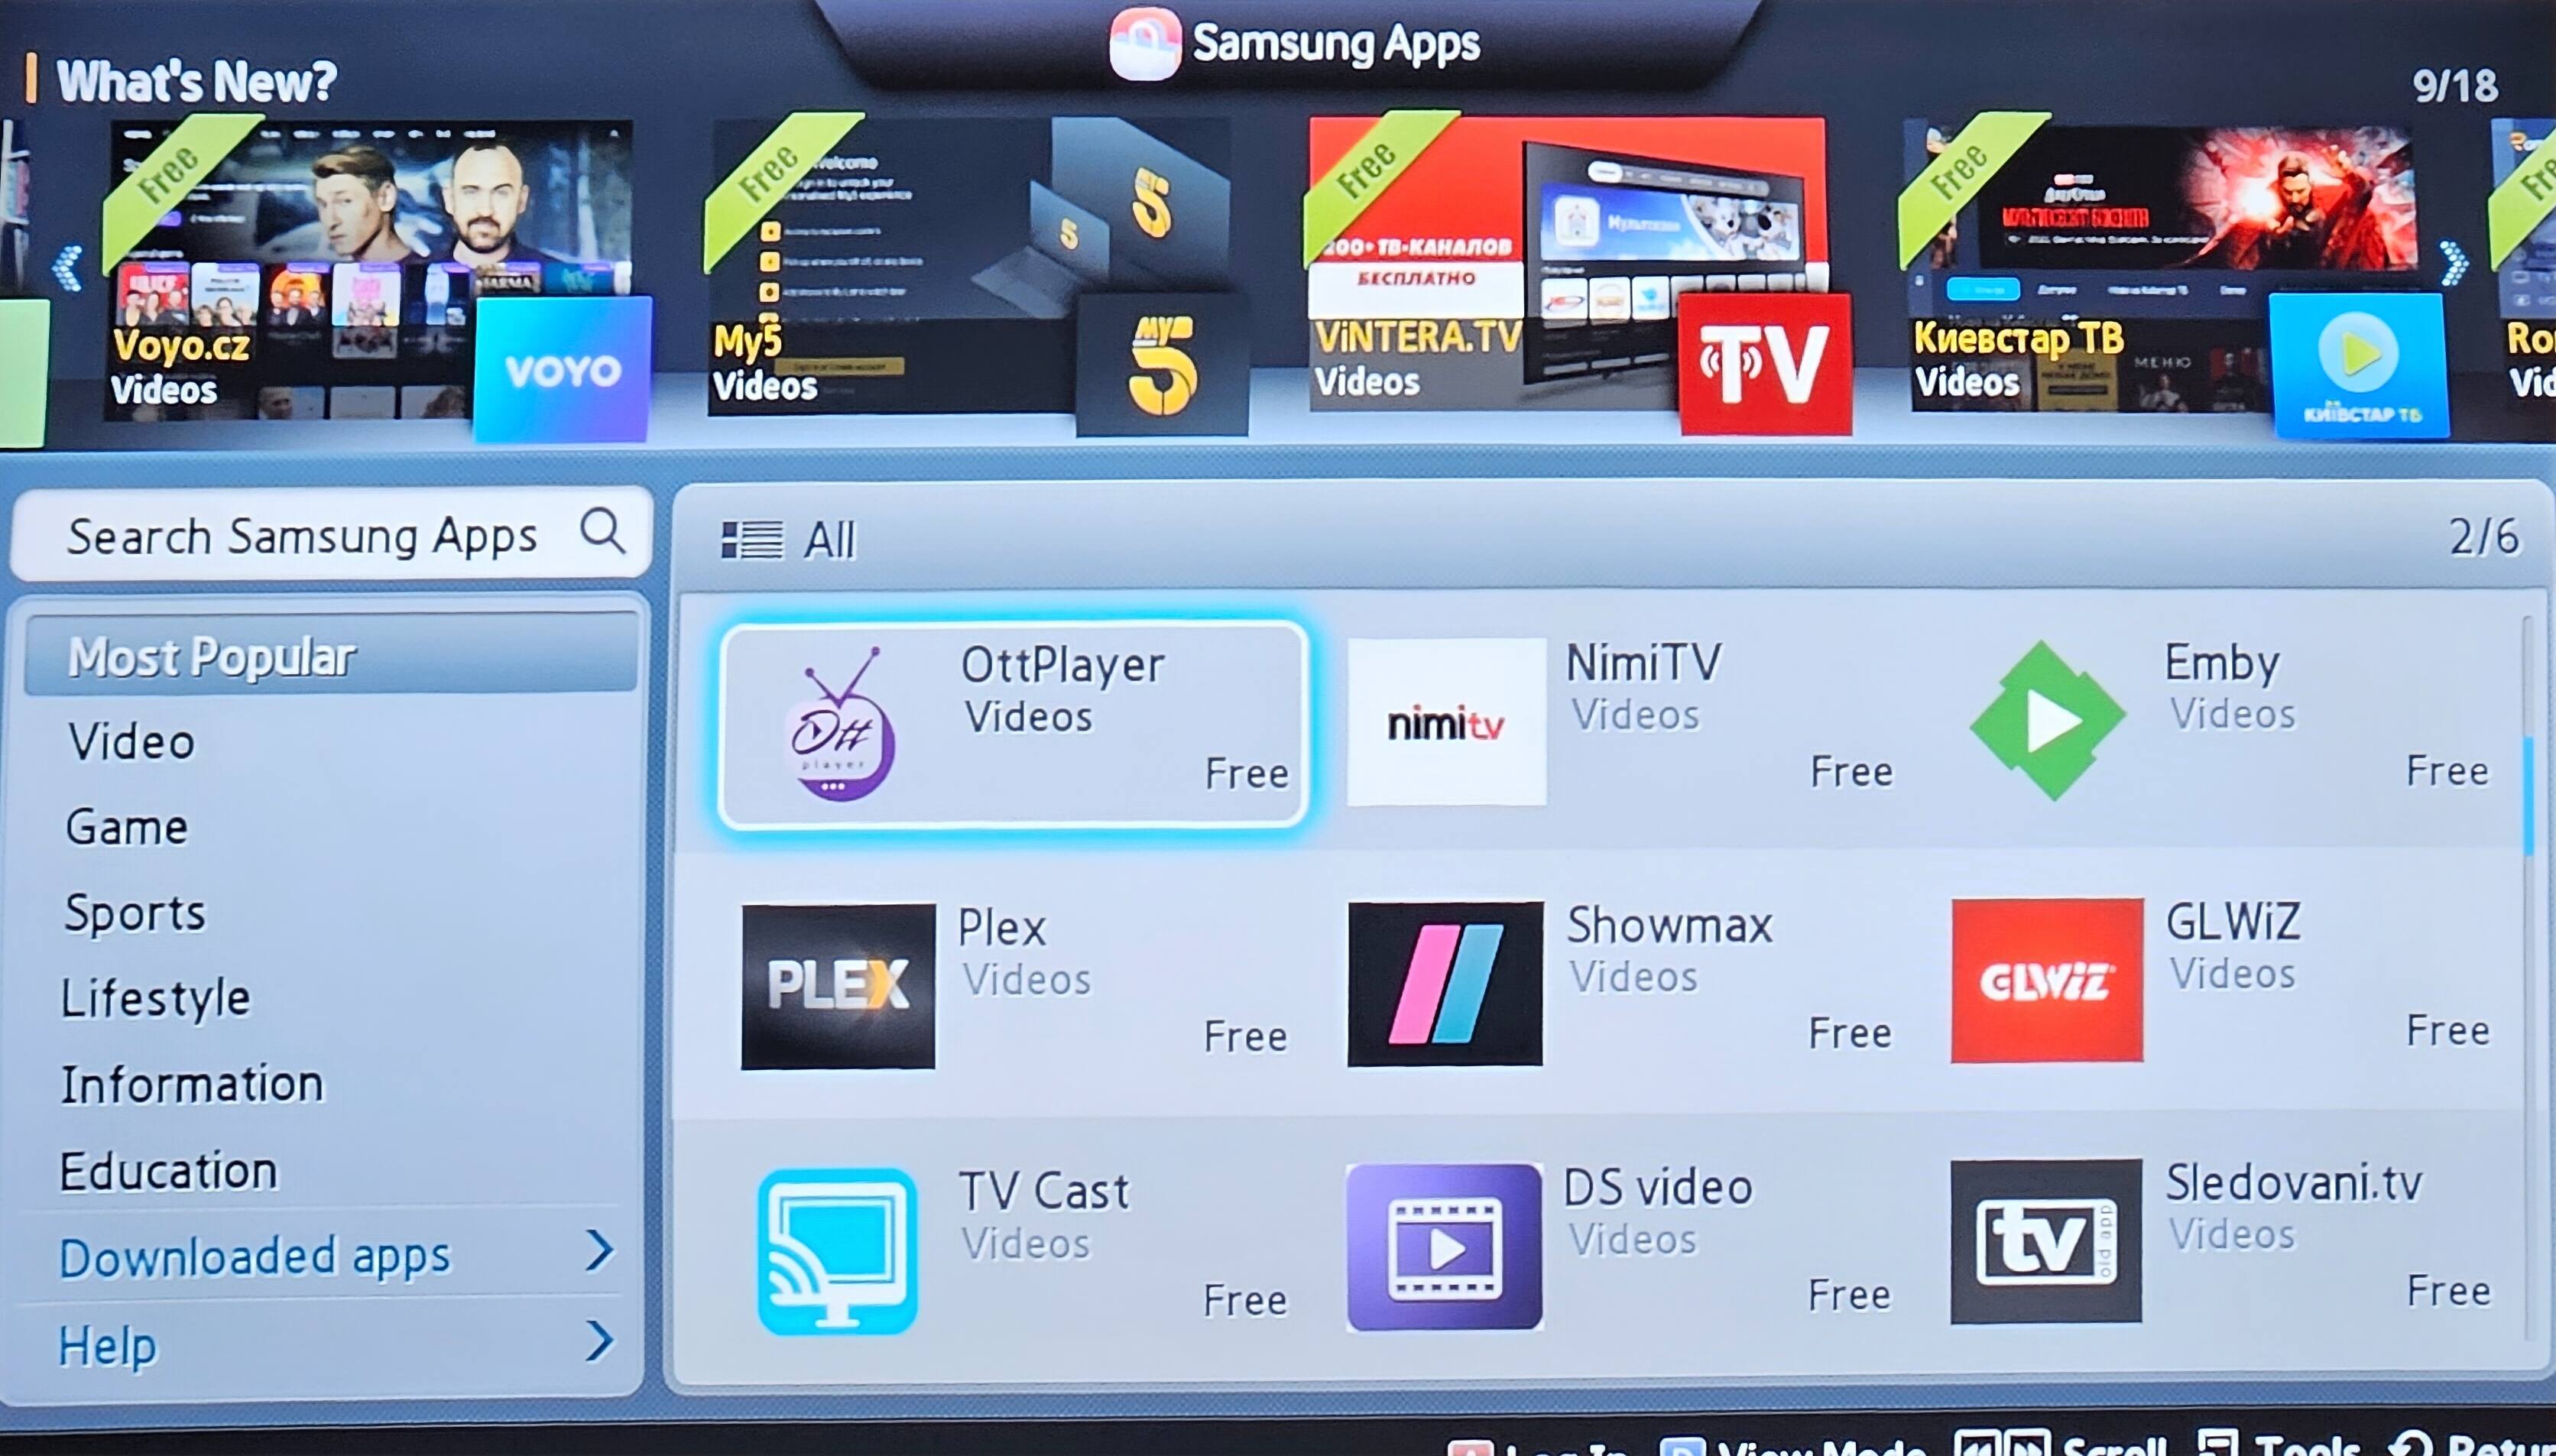 How to update apps on Samsung TV